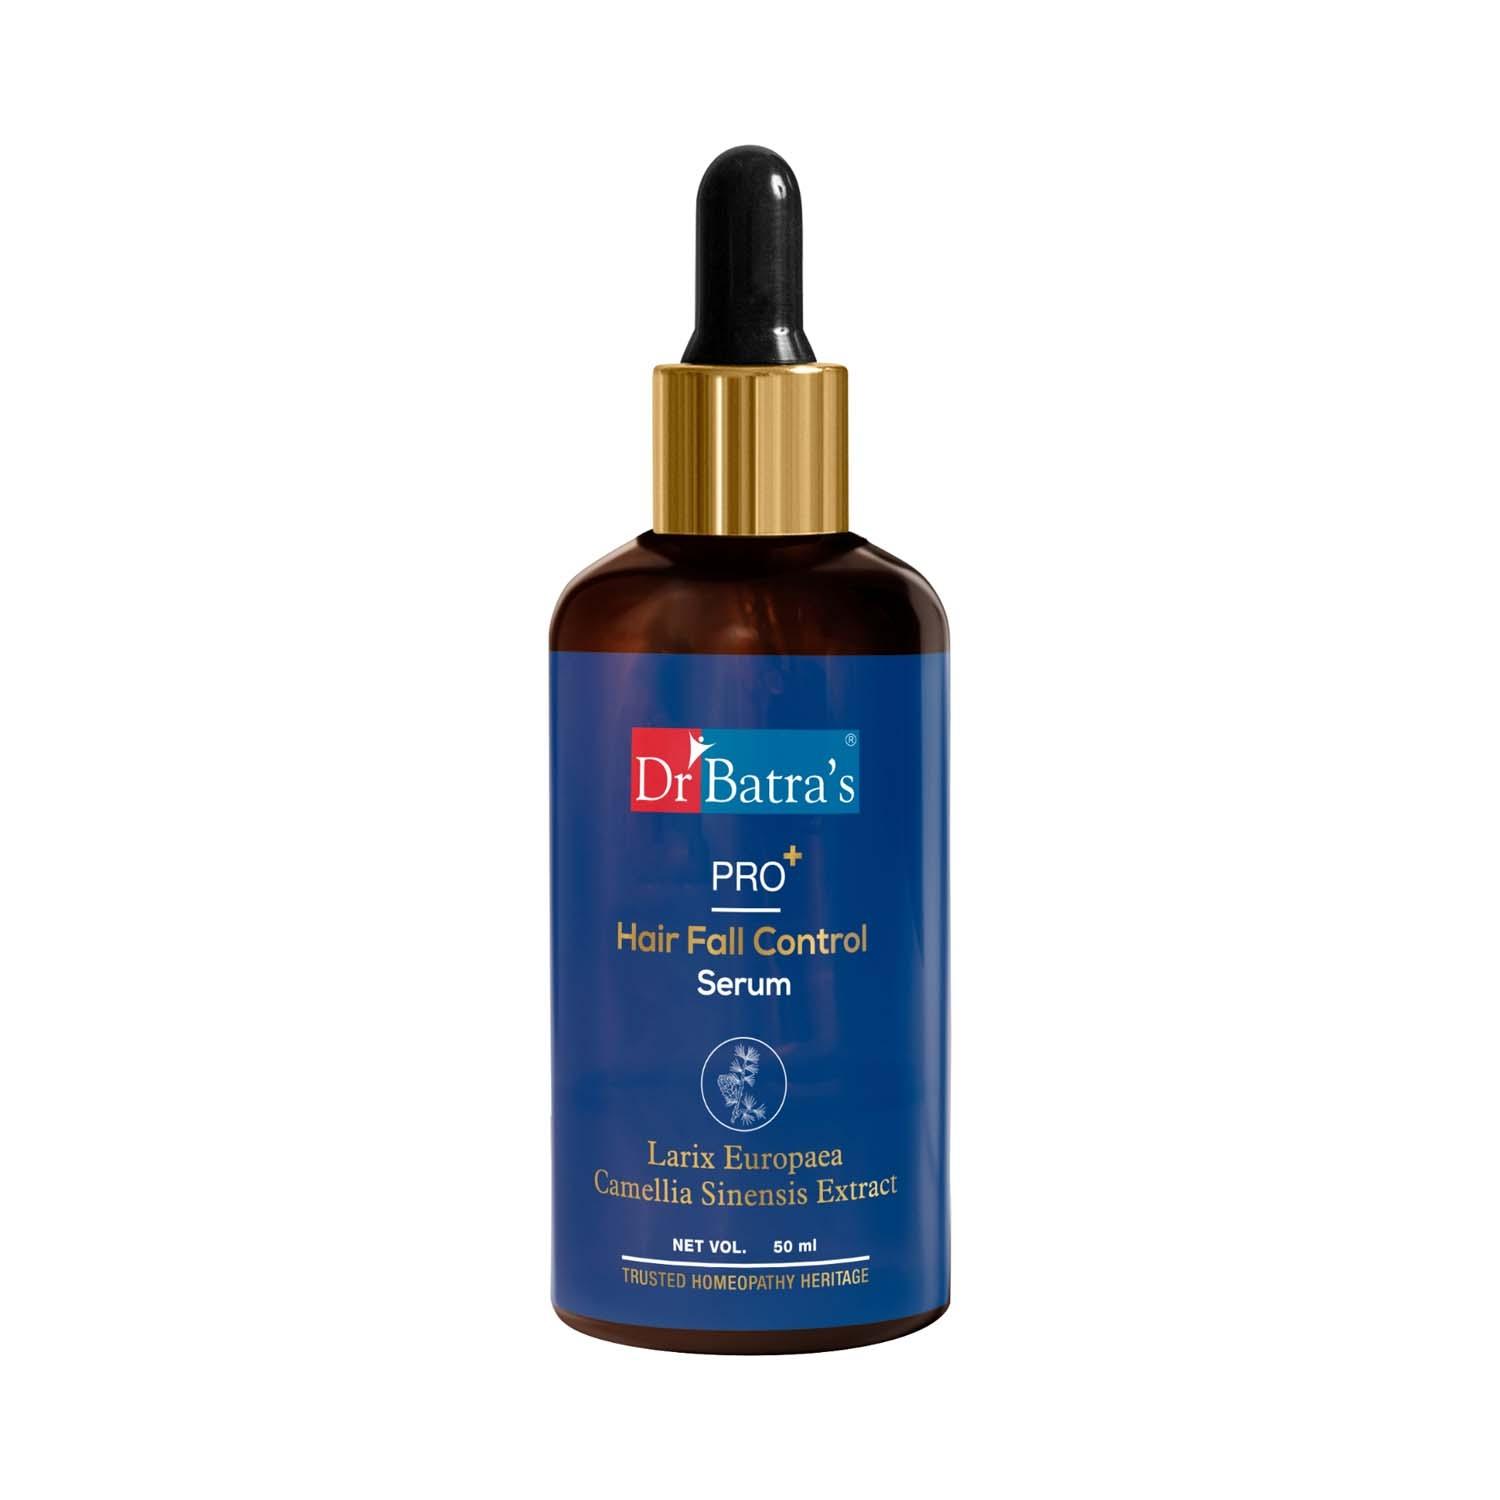 dr batra's pro hair fall control with larix europaea extract serum (50ml)